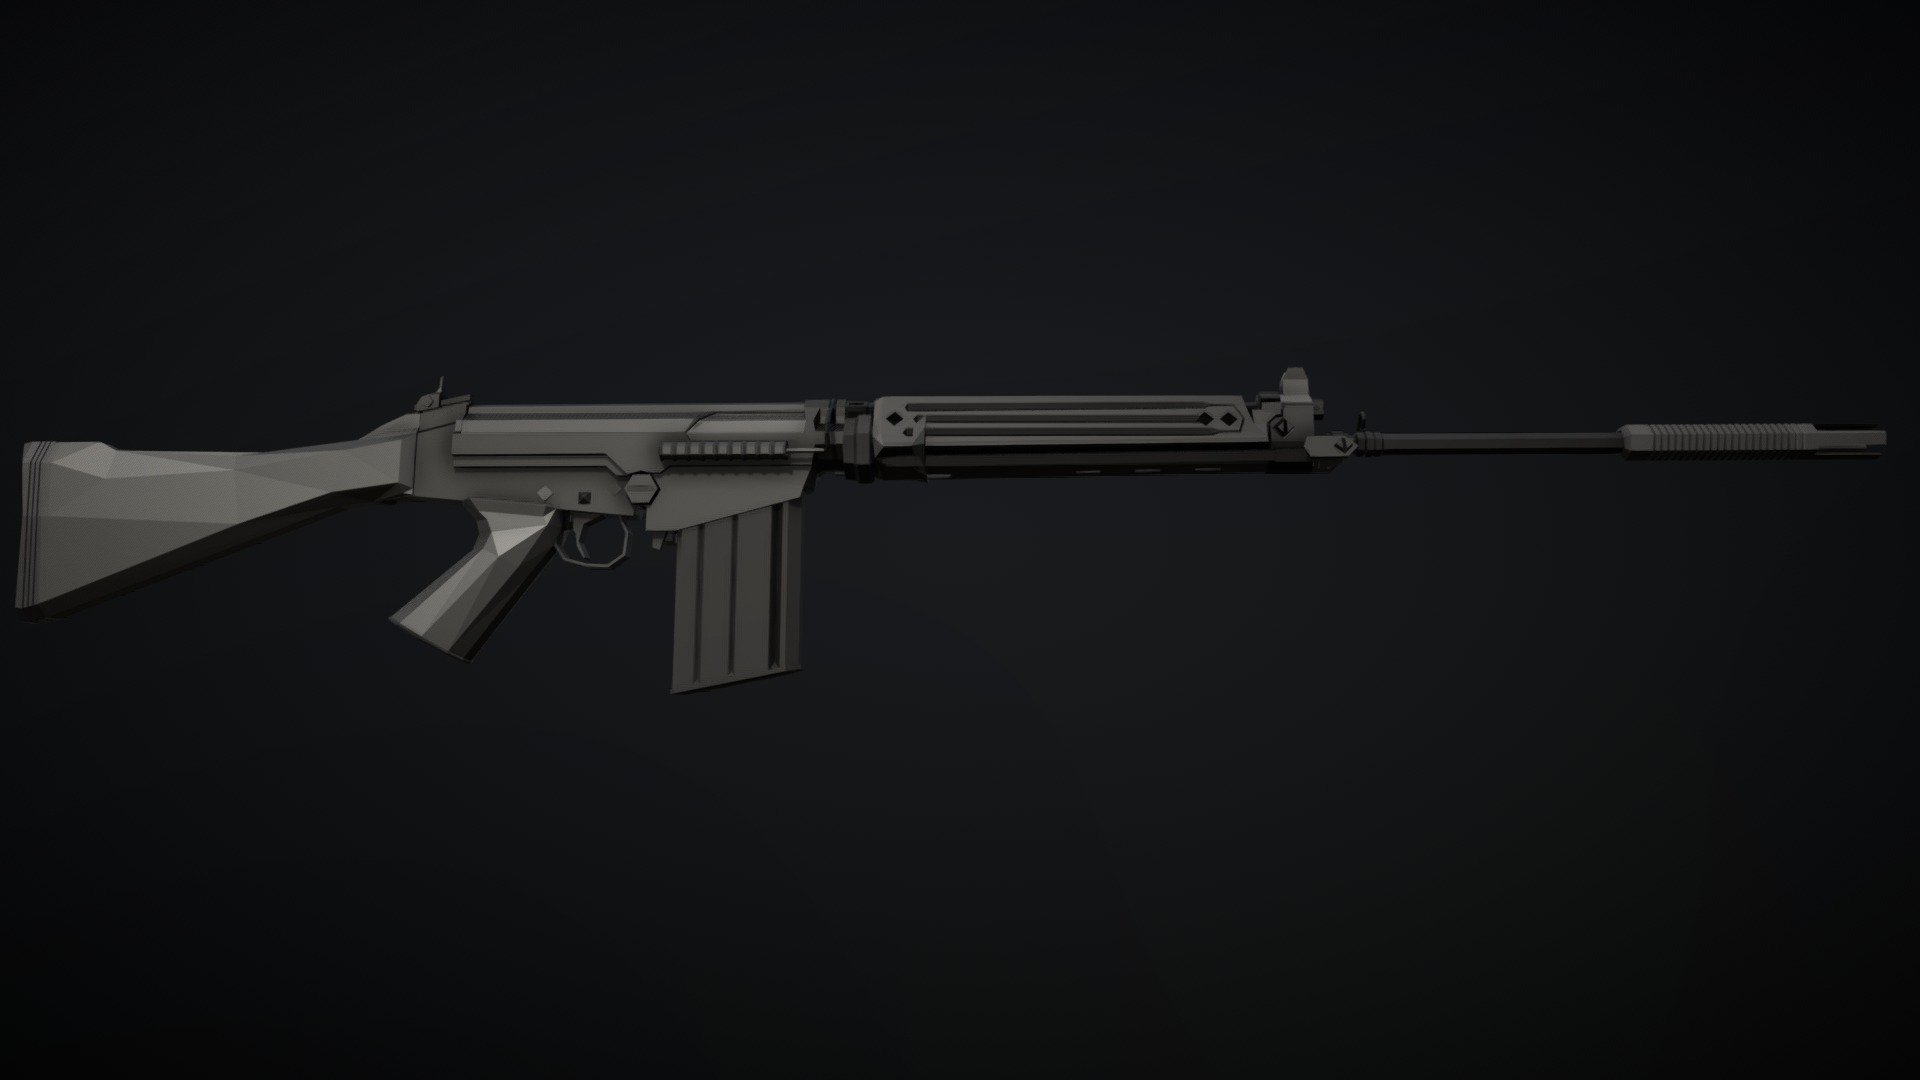 Low-Poly model of the StG. 58, an Austrian and later Austrian-produced variant of the FN FAL, with a distinct muzzle brake capable of launching rifle grenades, and a bipod for accurate and comfortable shooting while prone 3d model